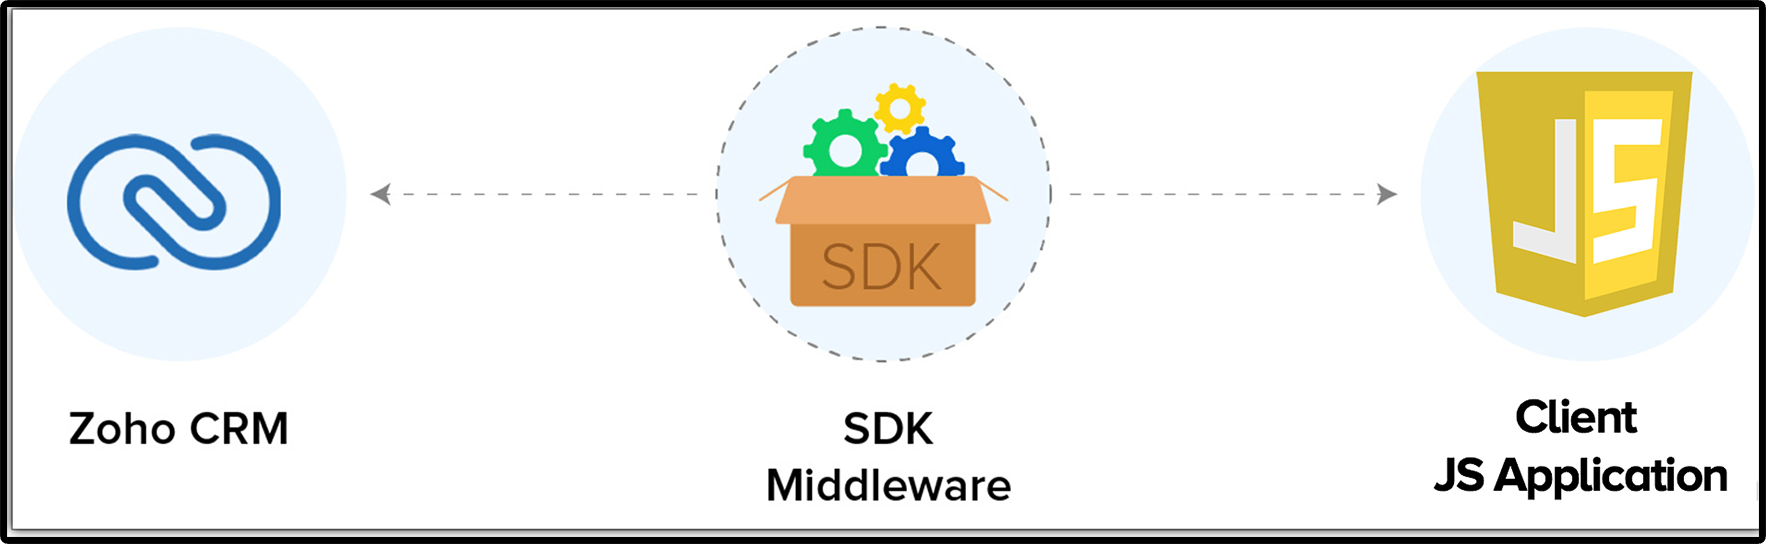 Middleware Image